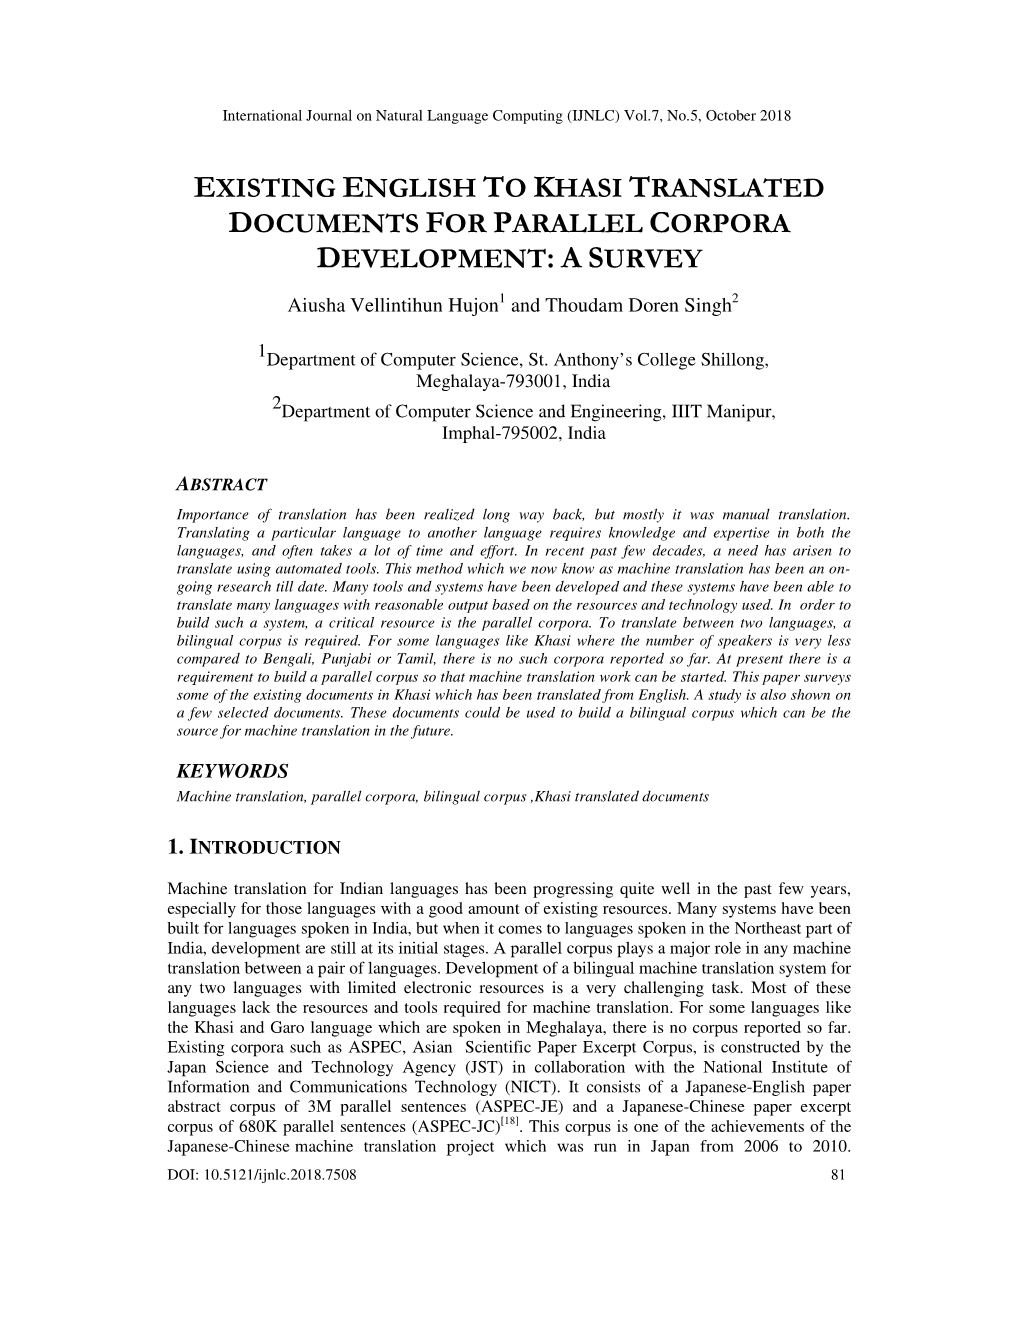 Existing English to Khasi Translated Documents for Parallel Corpora Development: a S Urvey